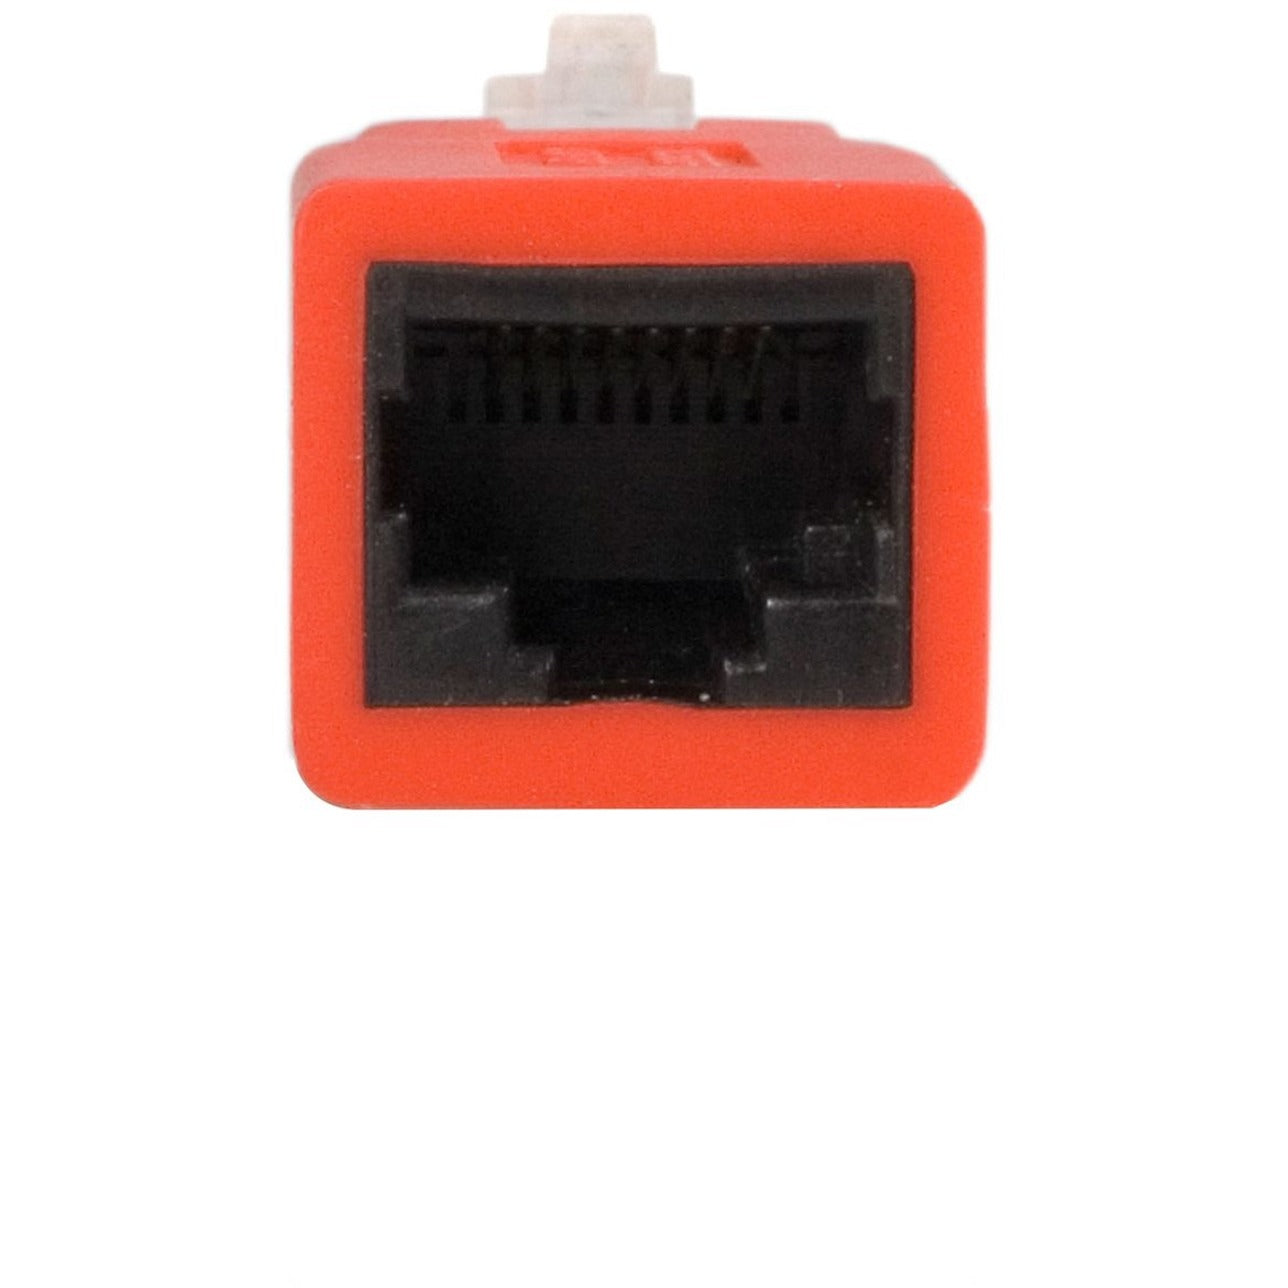 StarTech.com C6CROSSOVER Cat.6 to Crossover Adapter, RJ-45 Network Male to Female, Red